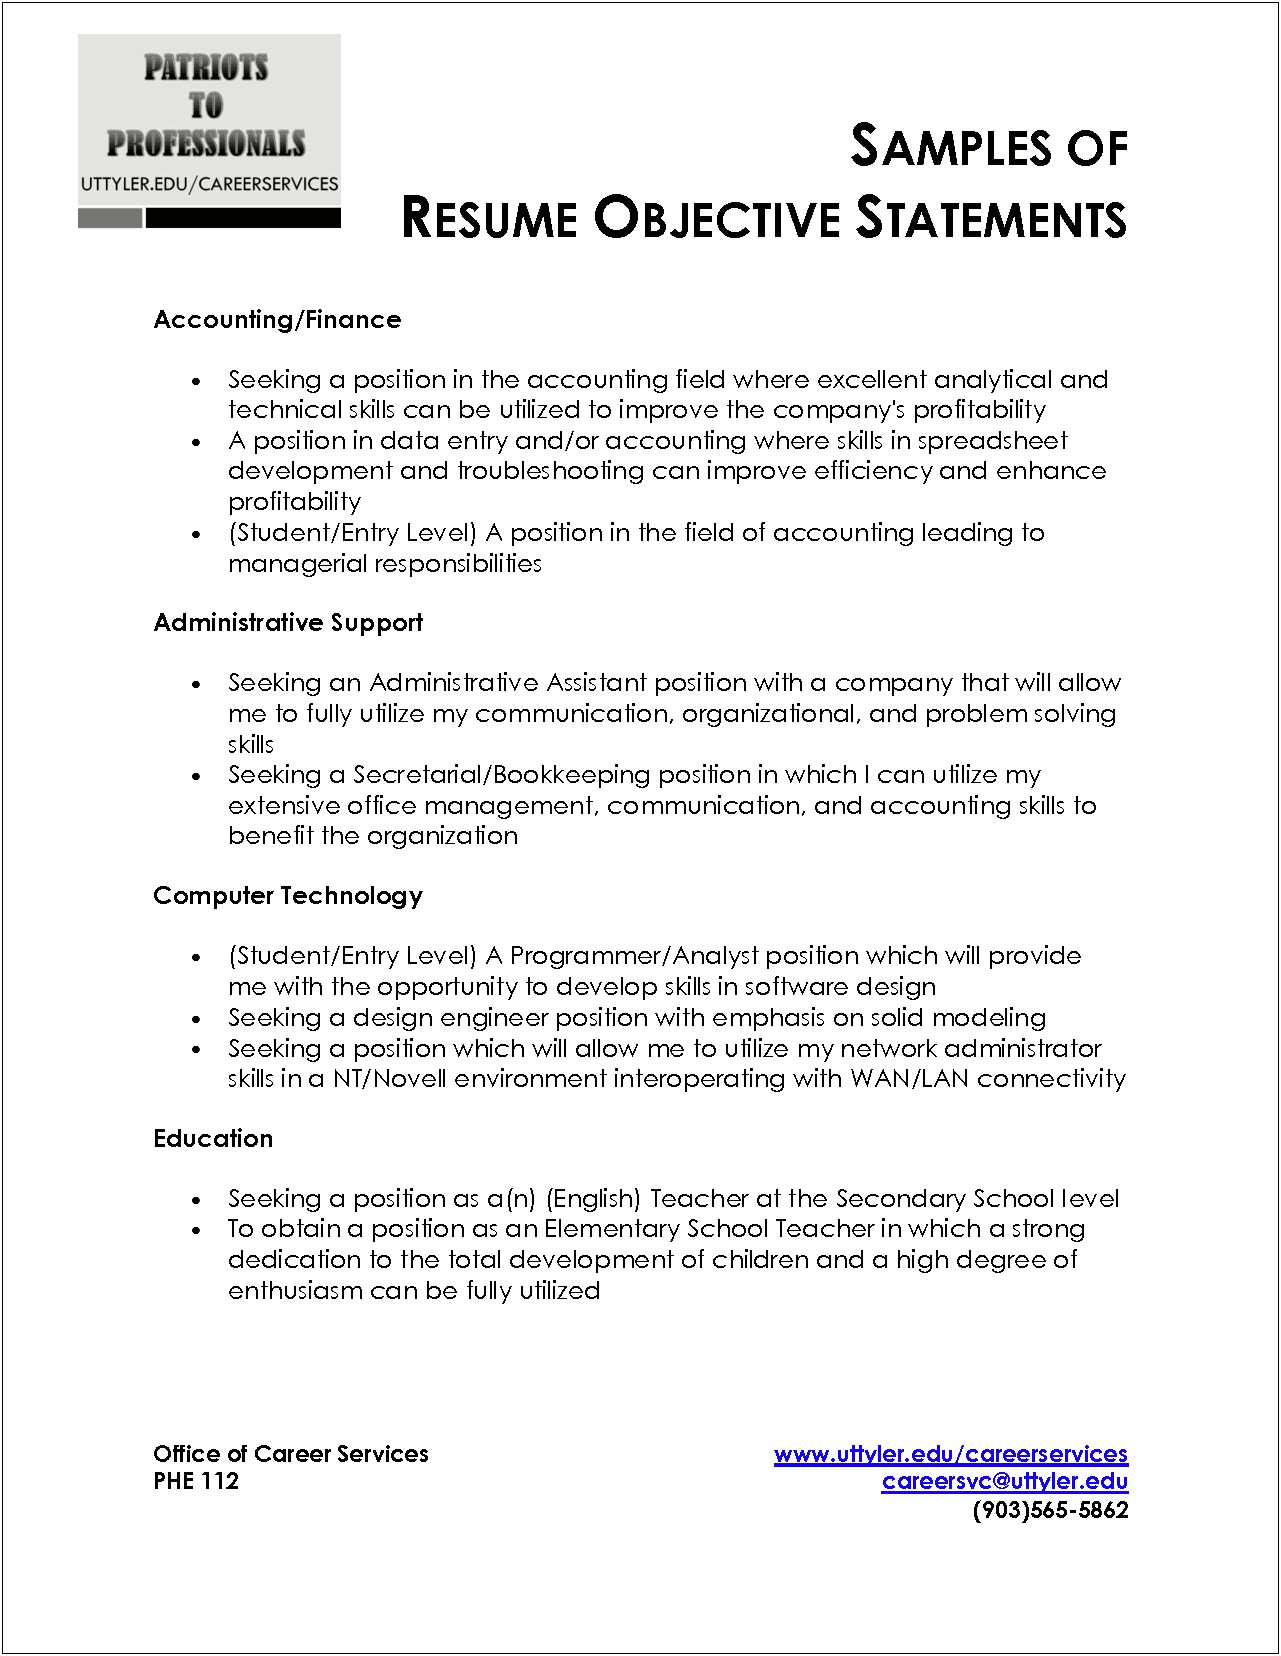 Resume Summary Statement Examples Banking Jobs